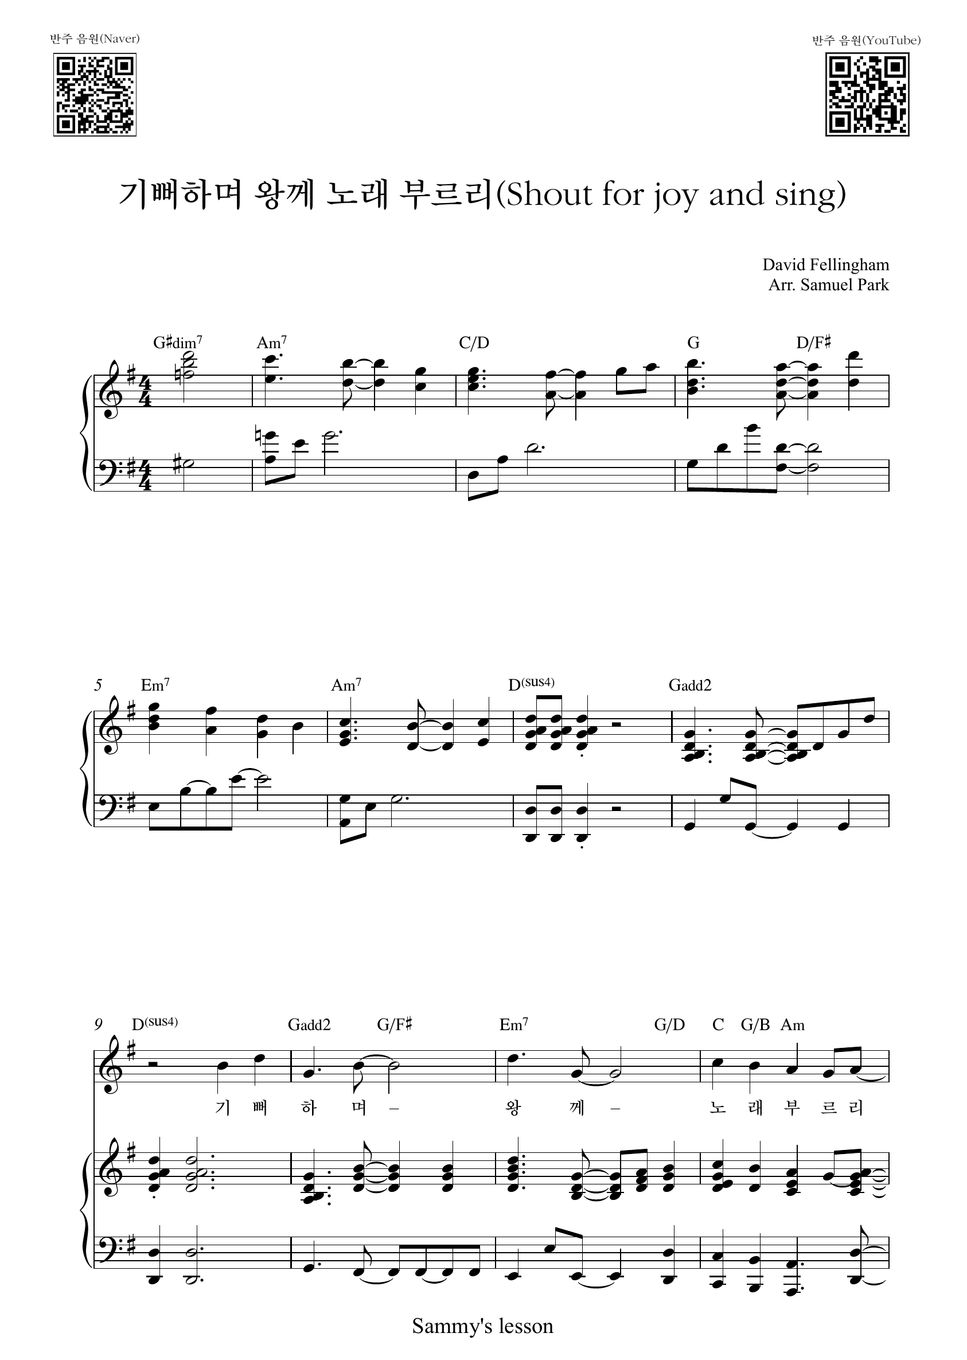 David Fellingham - 기뻐하며 왕께 노래 부르리(Shout For Joy And Sing) (Piano Cover)  Sheets By Samuel Park